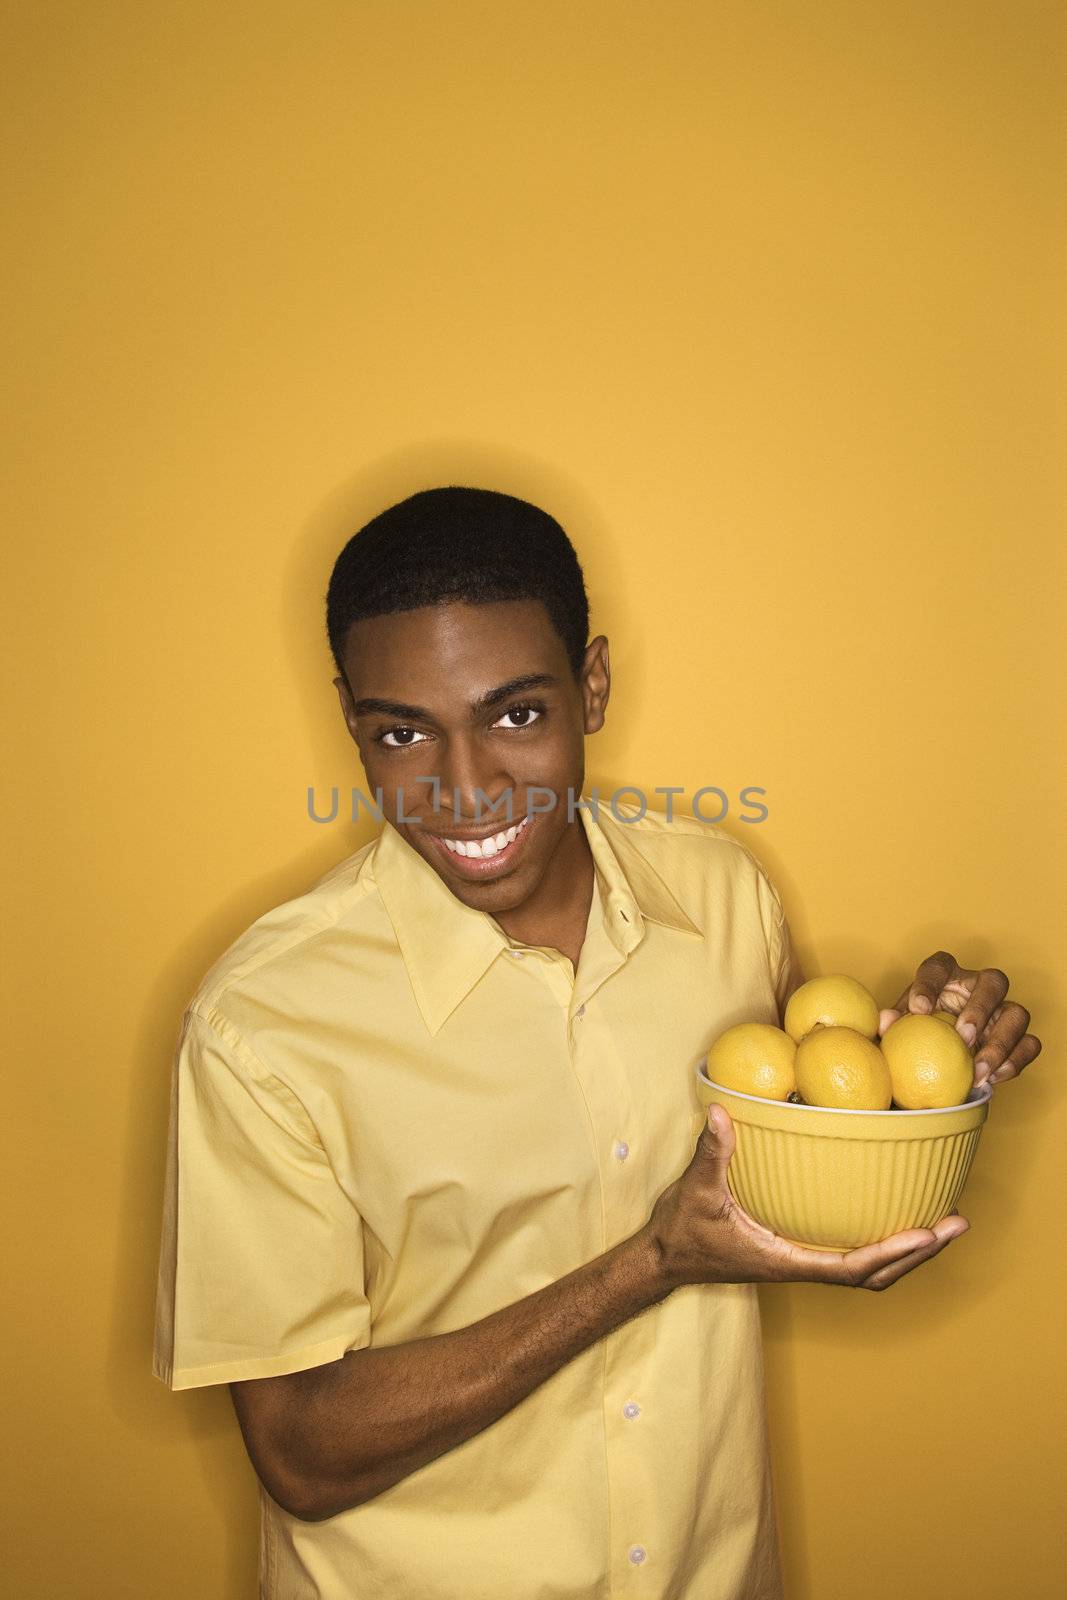 Smiling young African-American man holding bowl of lemons on yellow background.